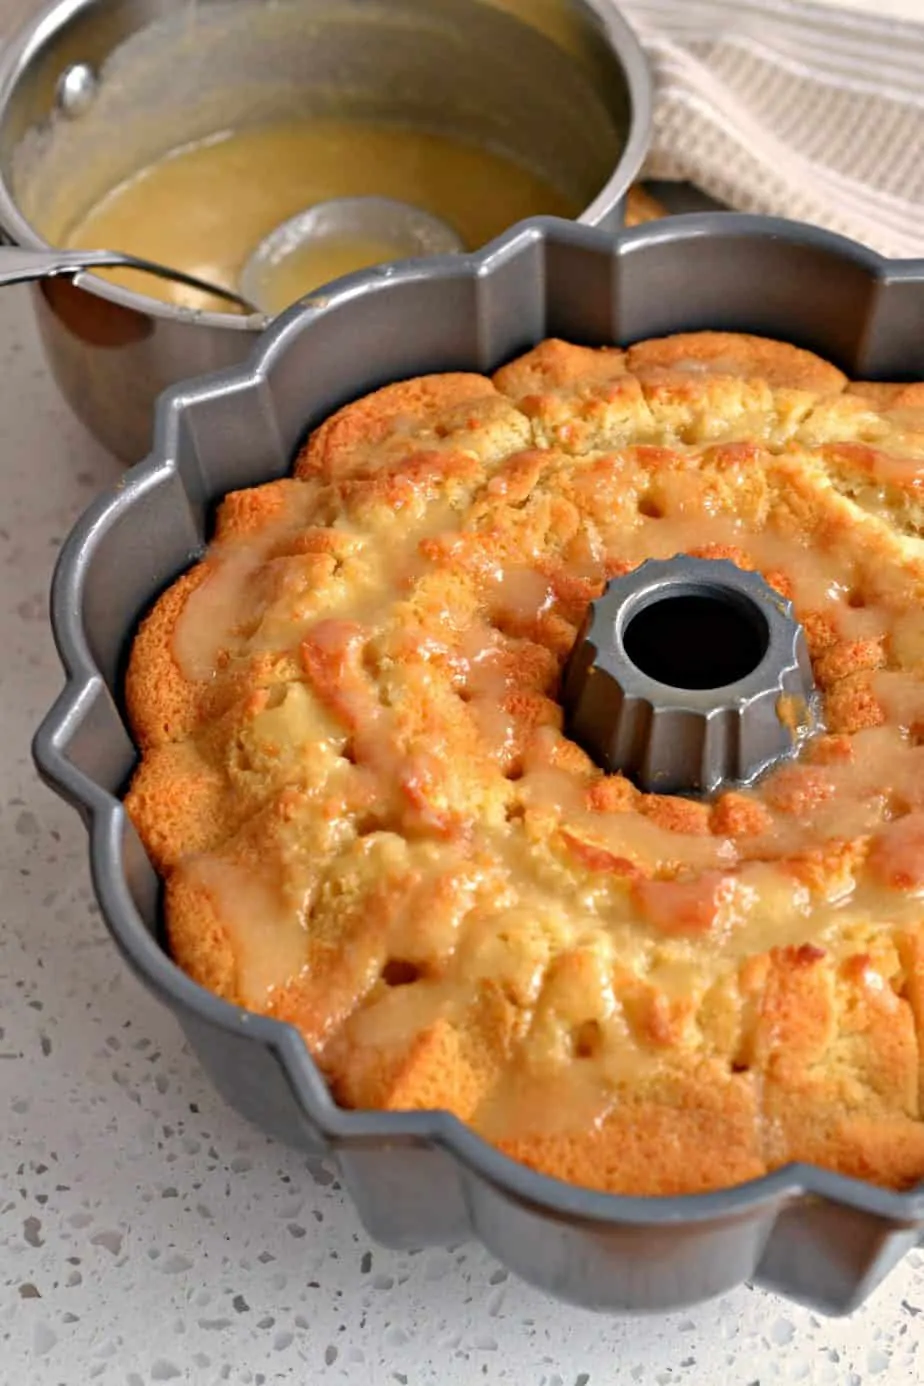  The butter sauce is brushed on the outside of the cake, creating a heavenly crisp crust that takes this cake over the top with the flavor of vanilla and butter. 